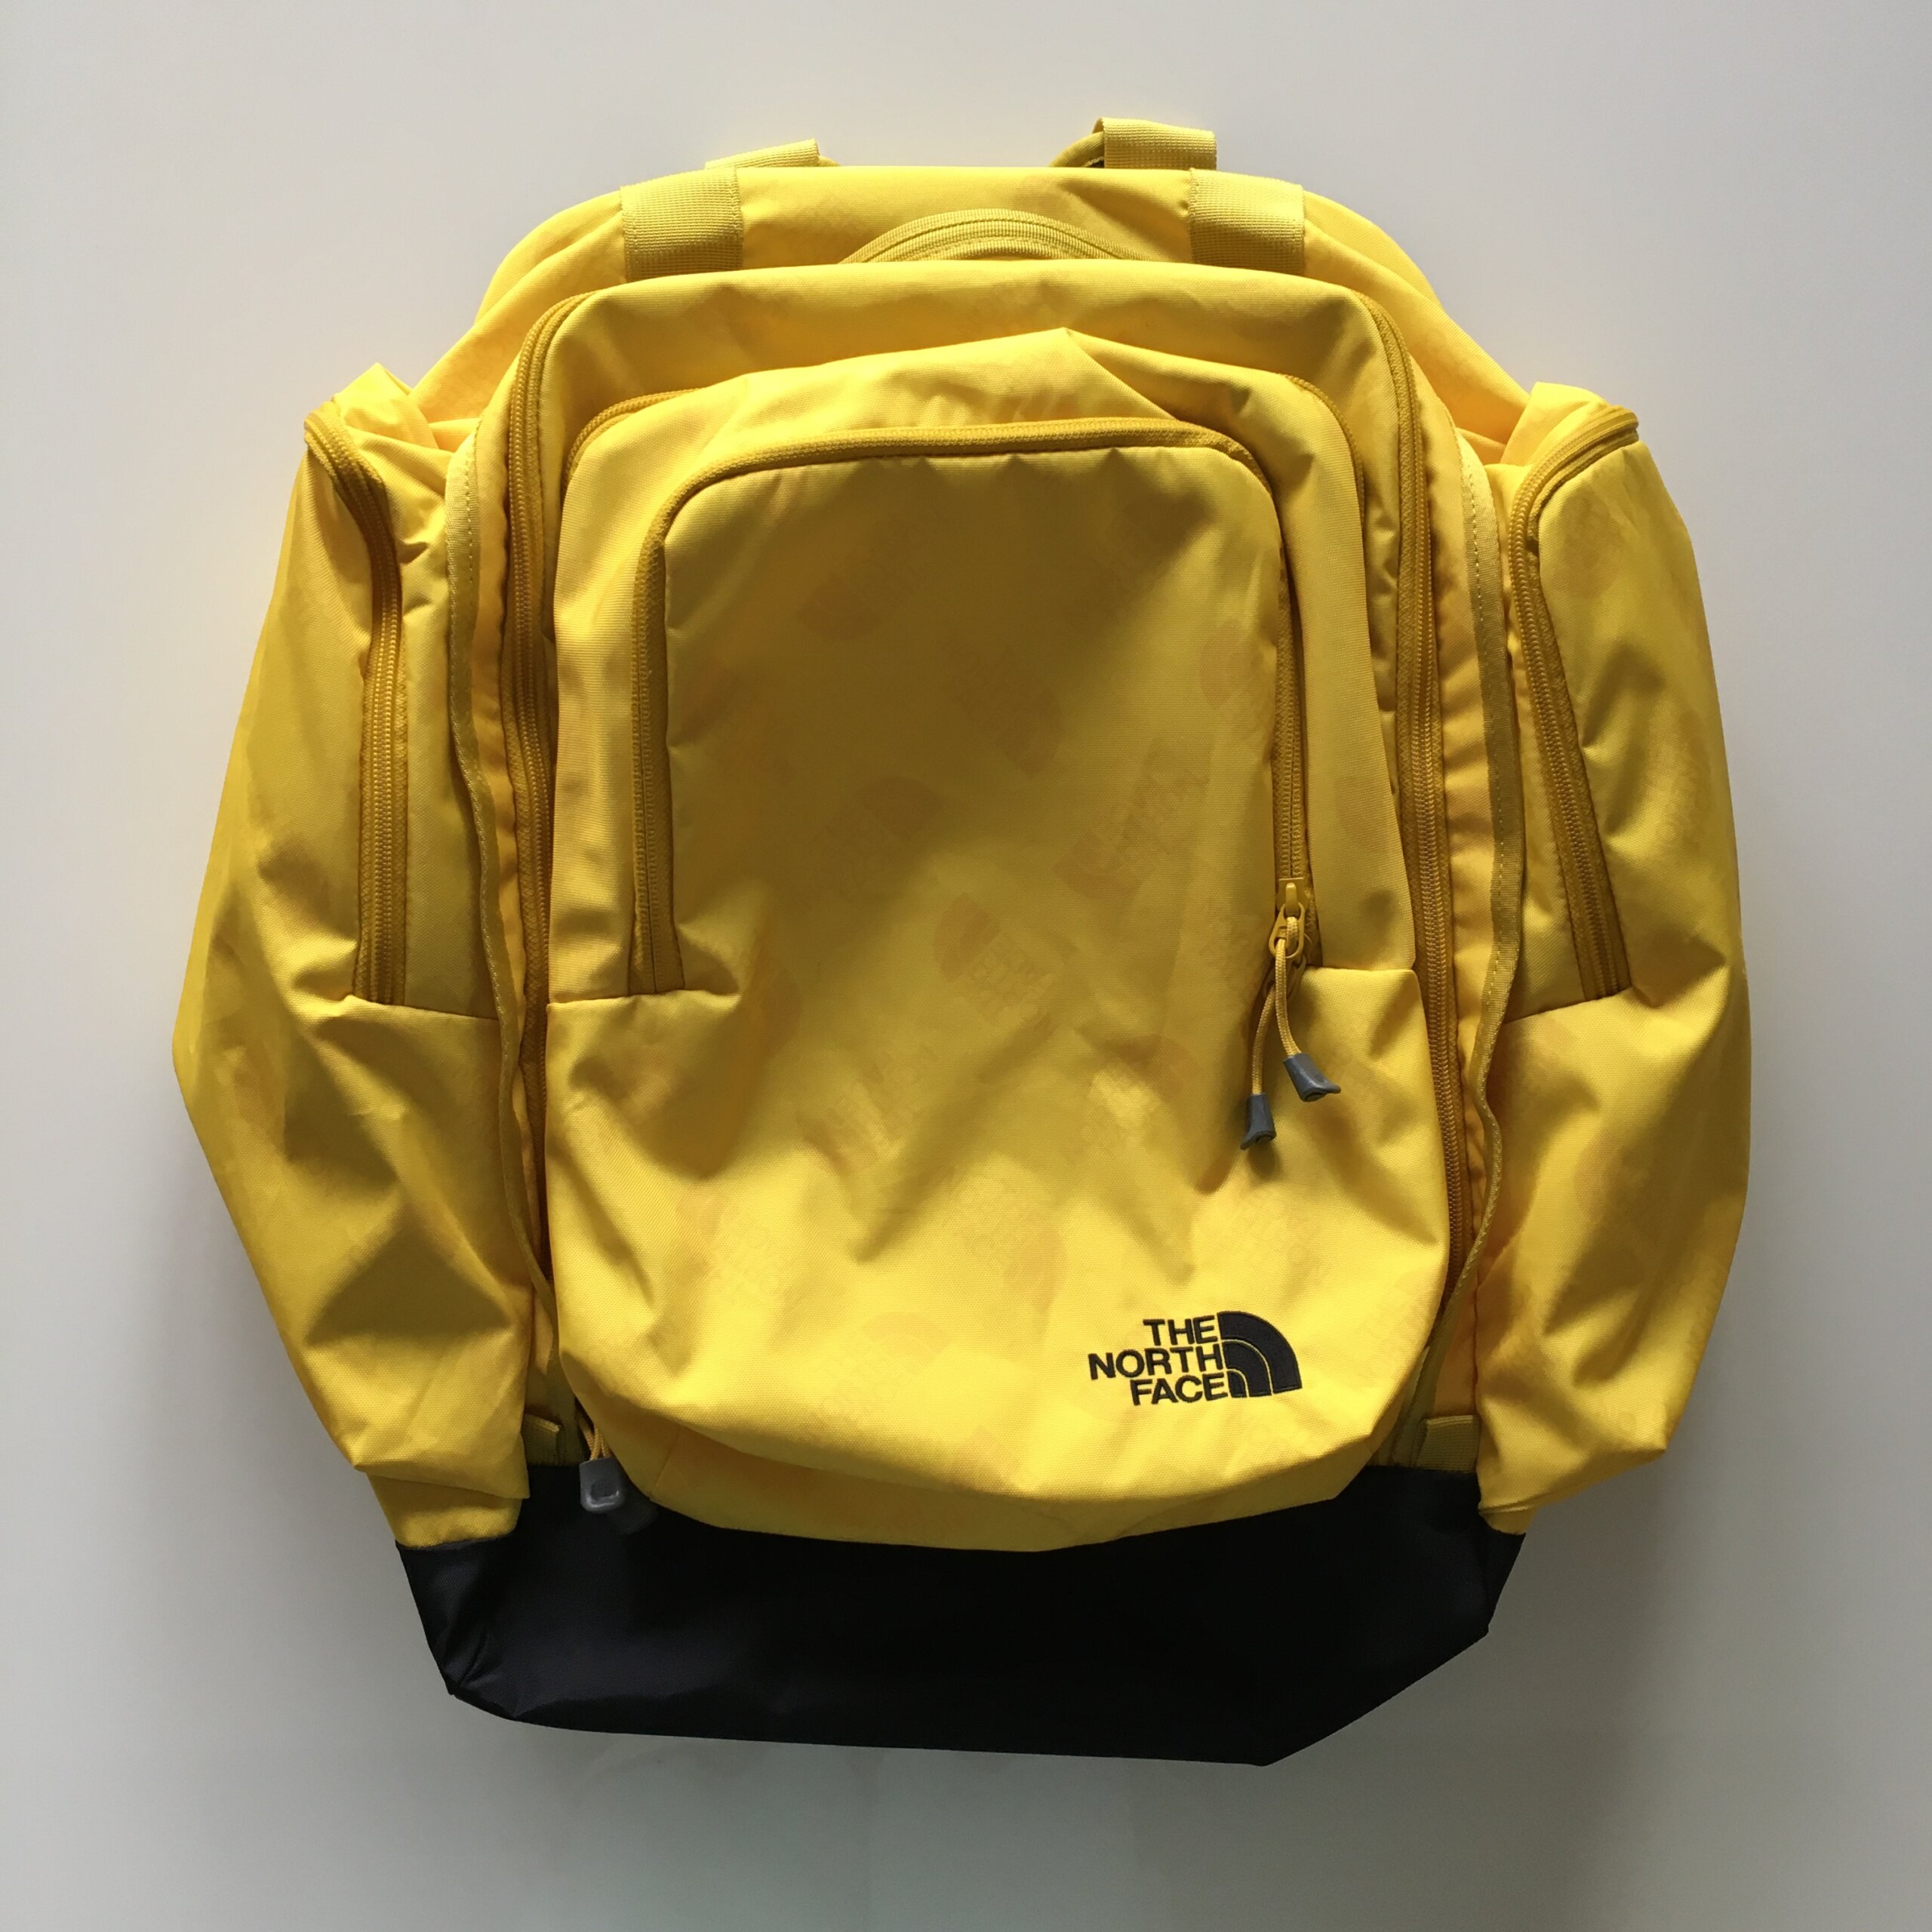 THE NORTH FACE】サニーキャンパー40+6(キッズ)で上海渡航準備 | LEE